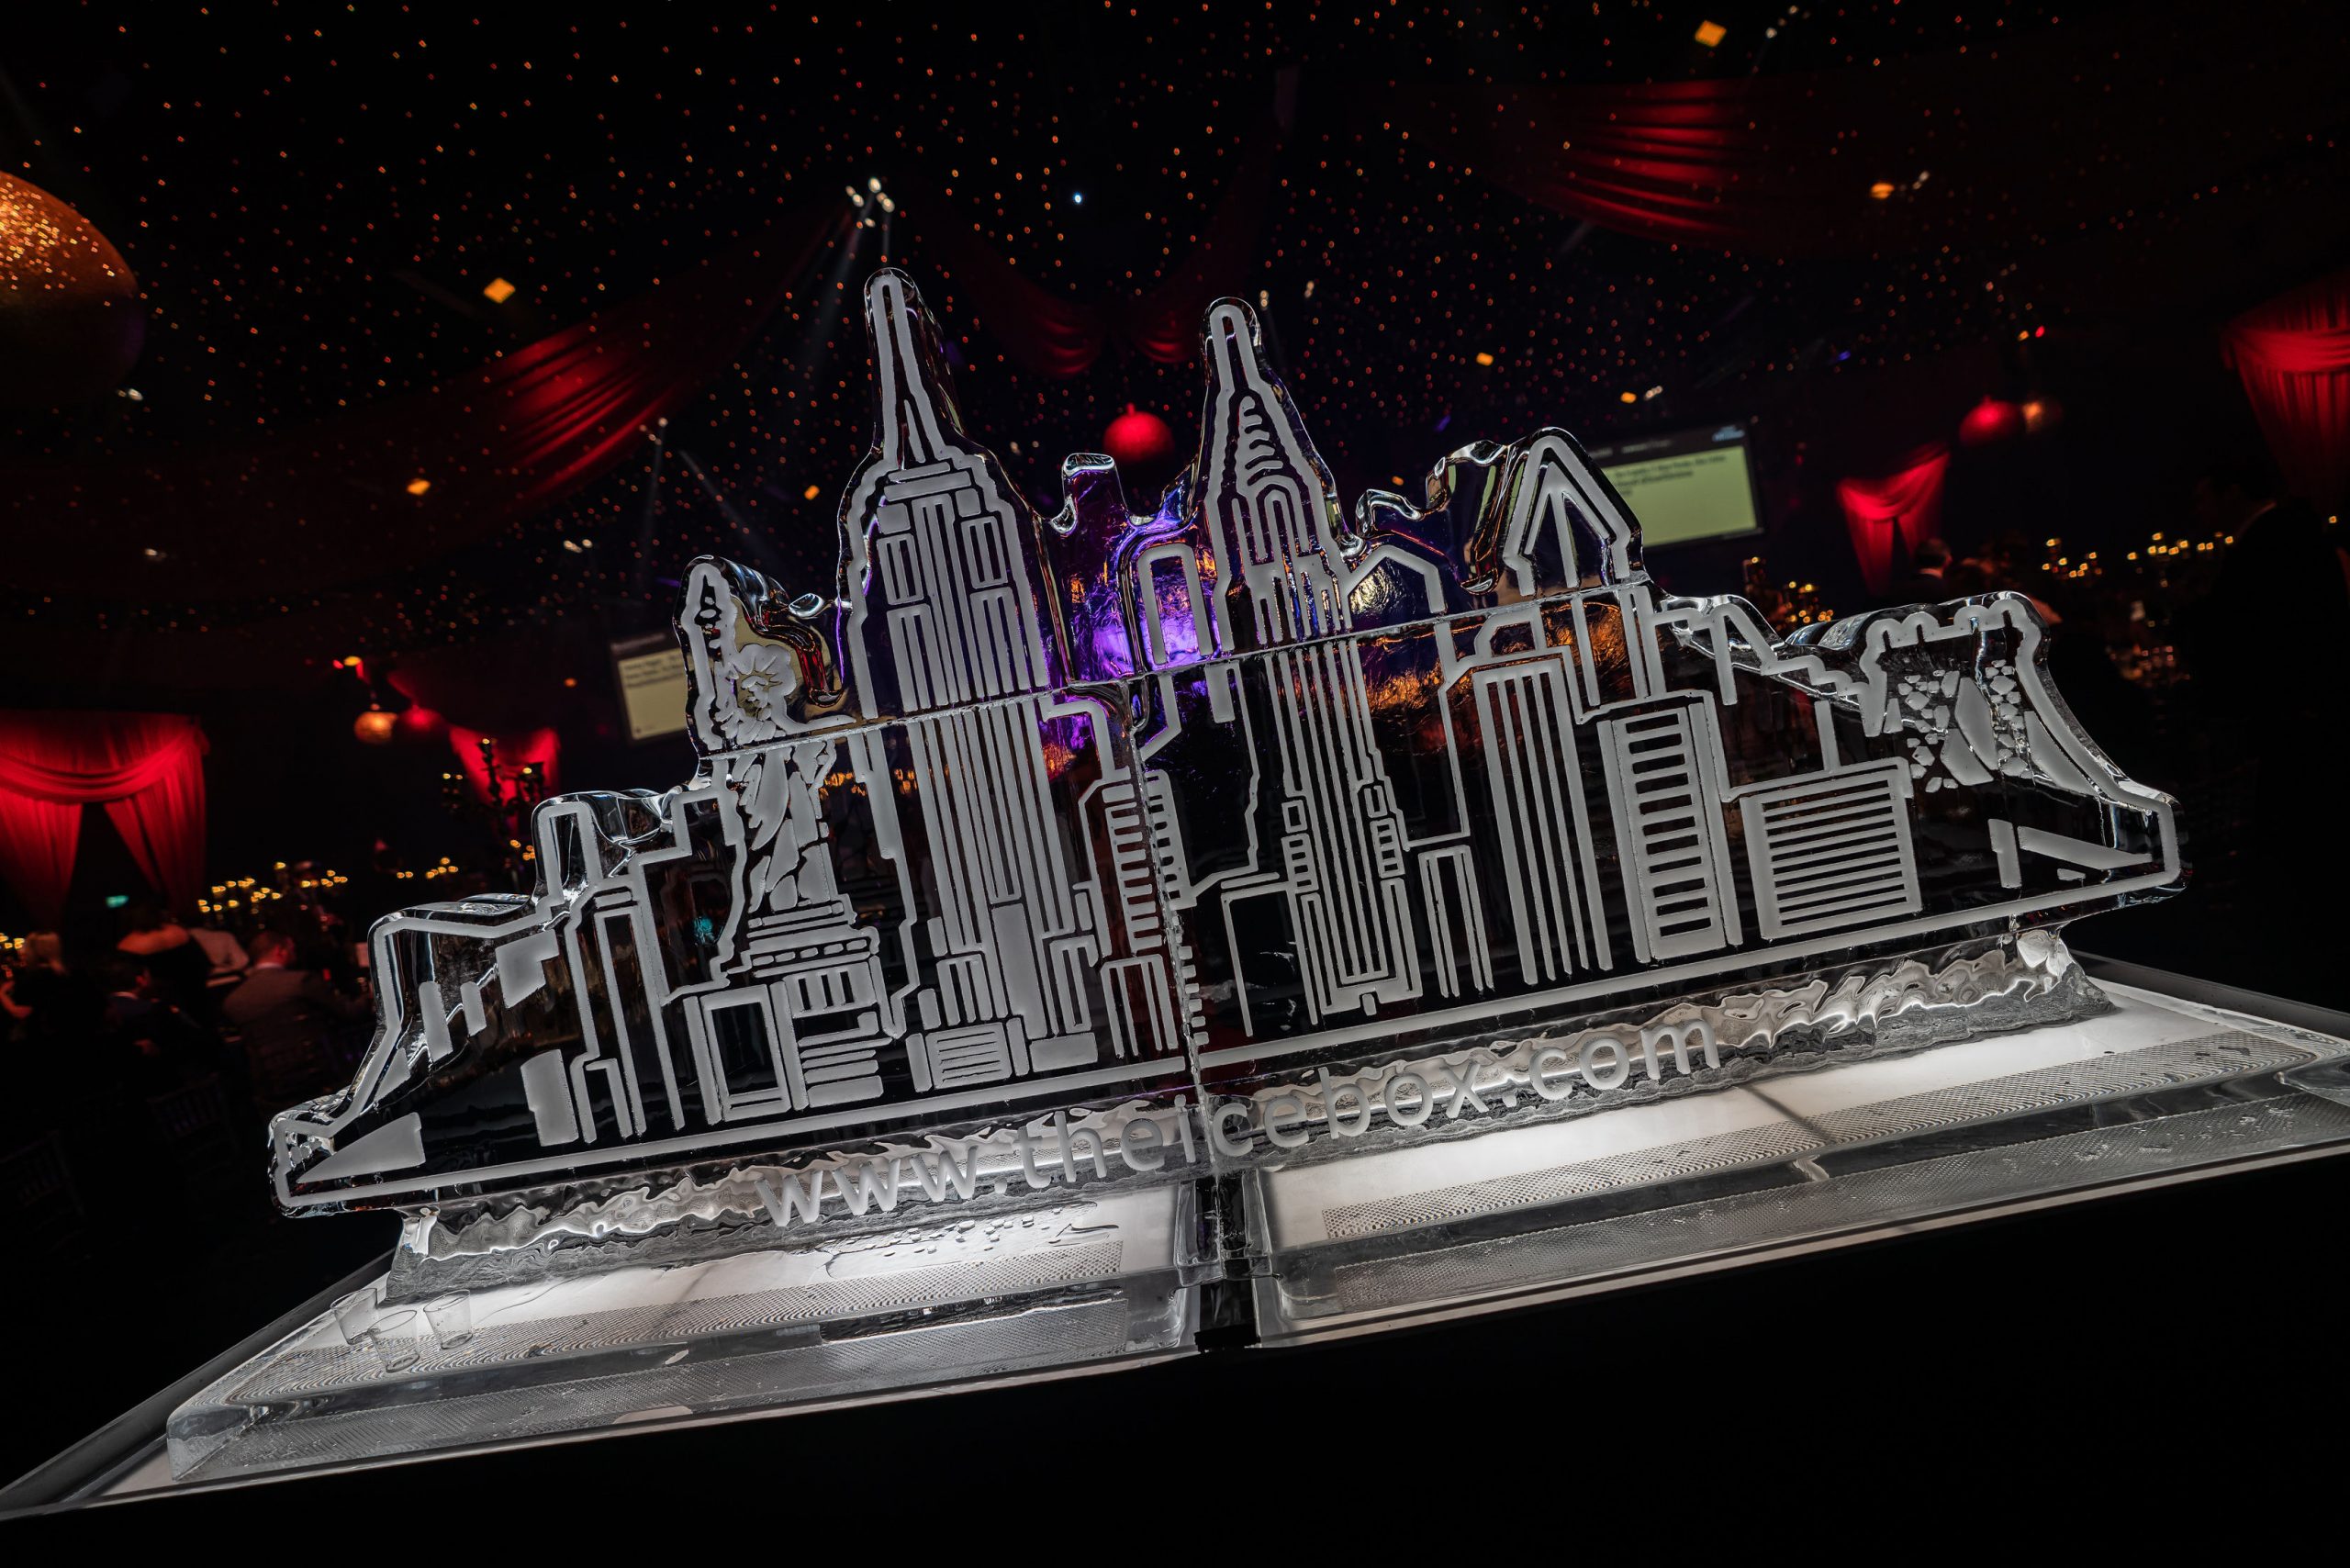 Ice Luge Picture Gallery - New York